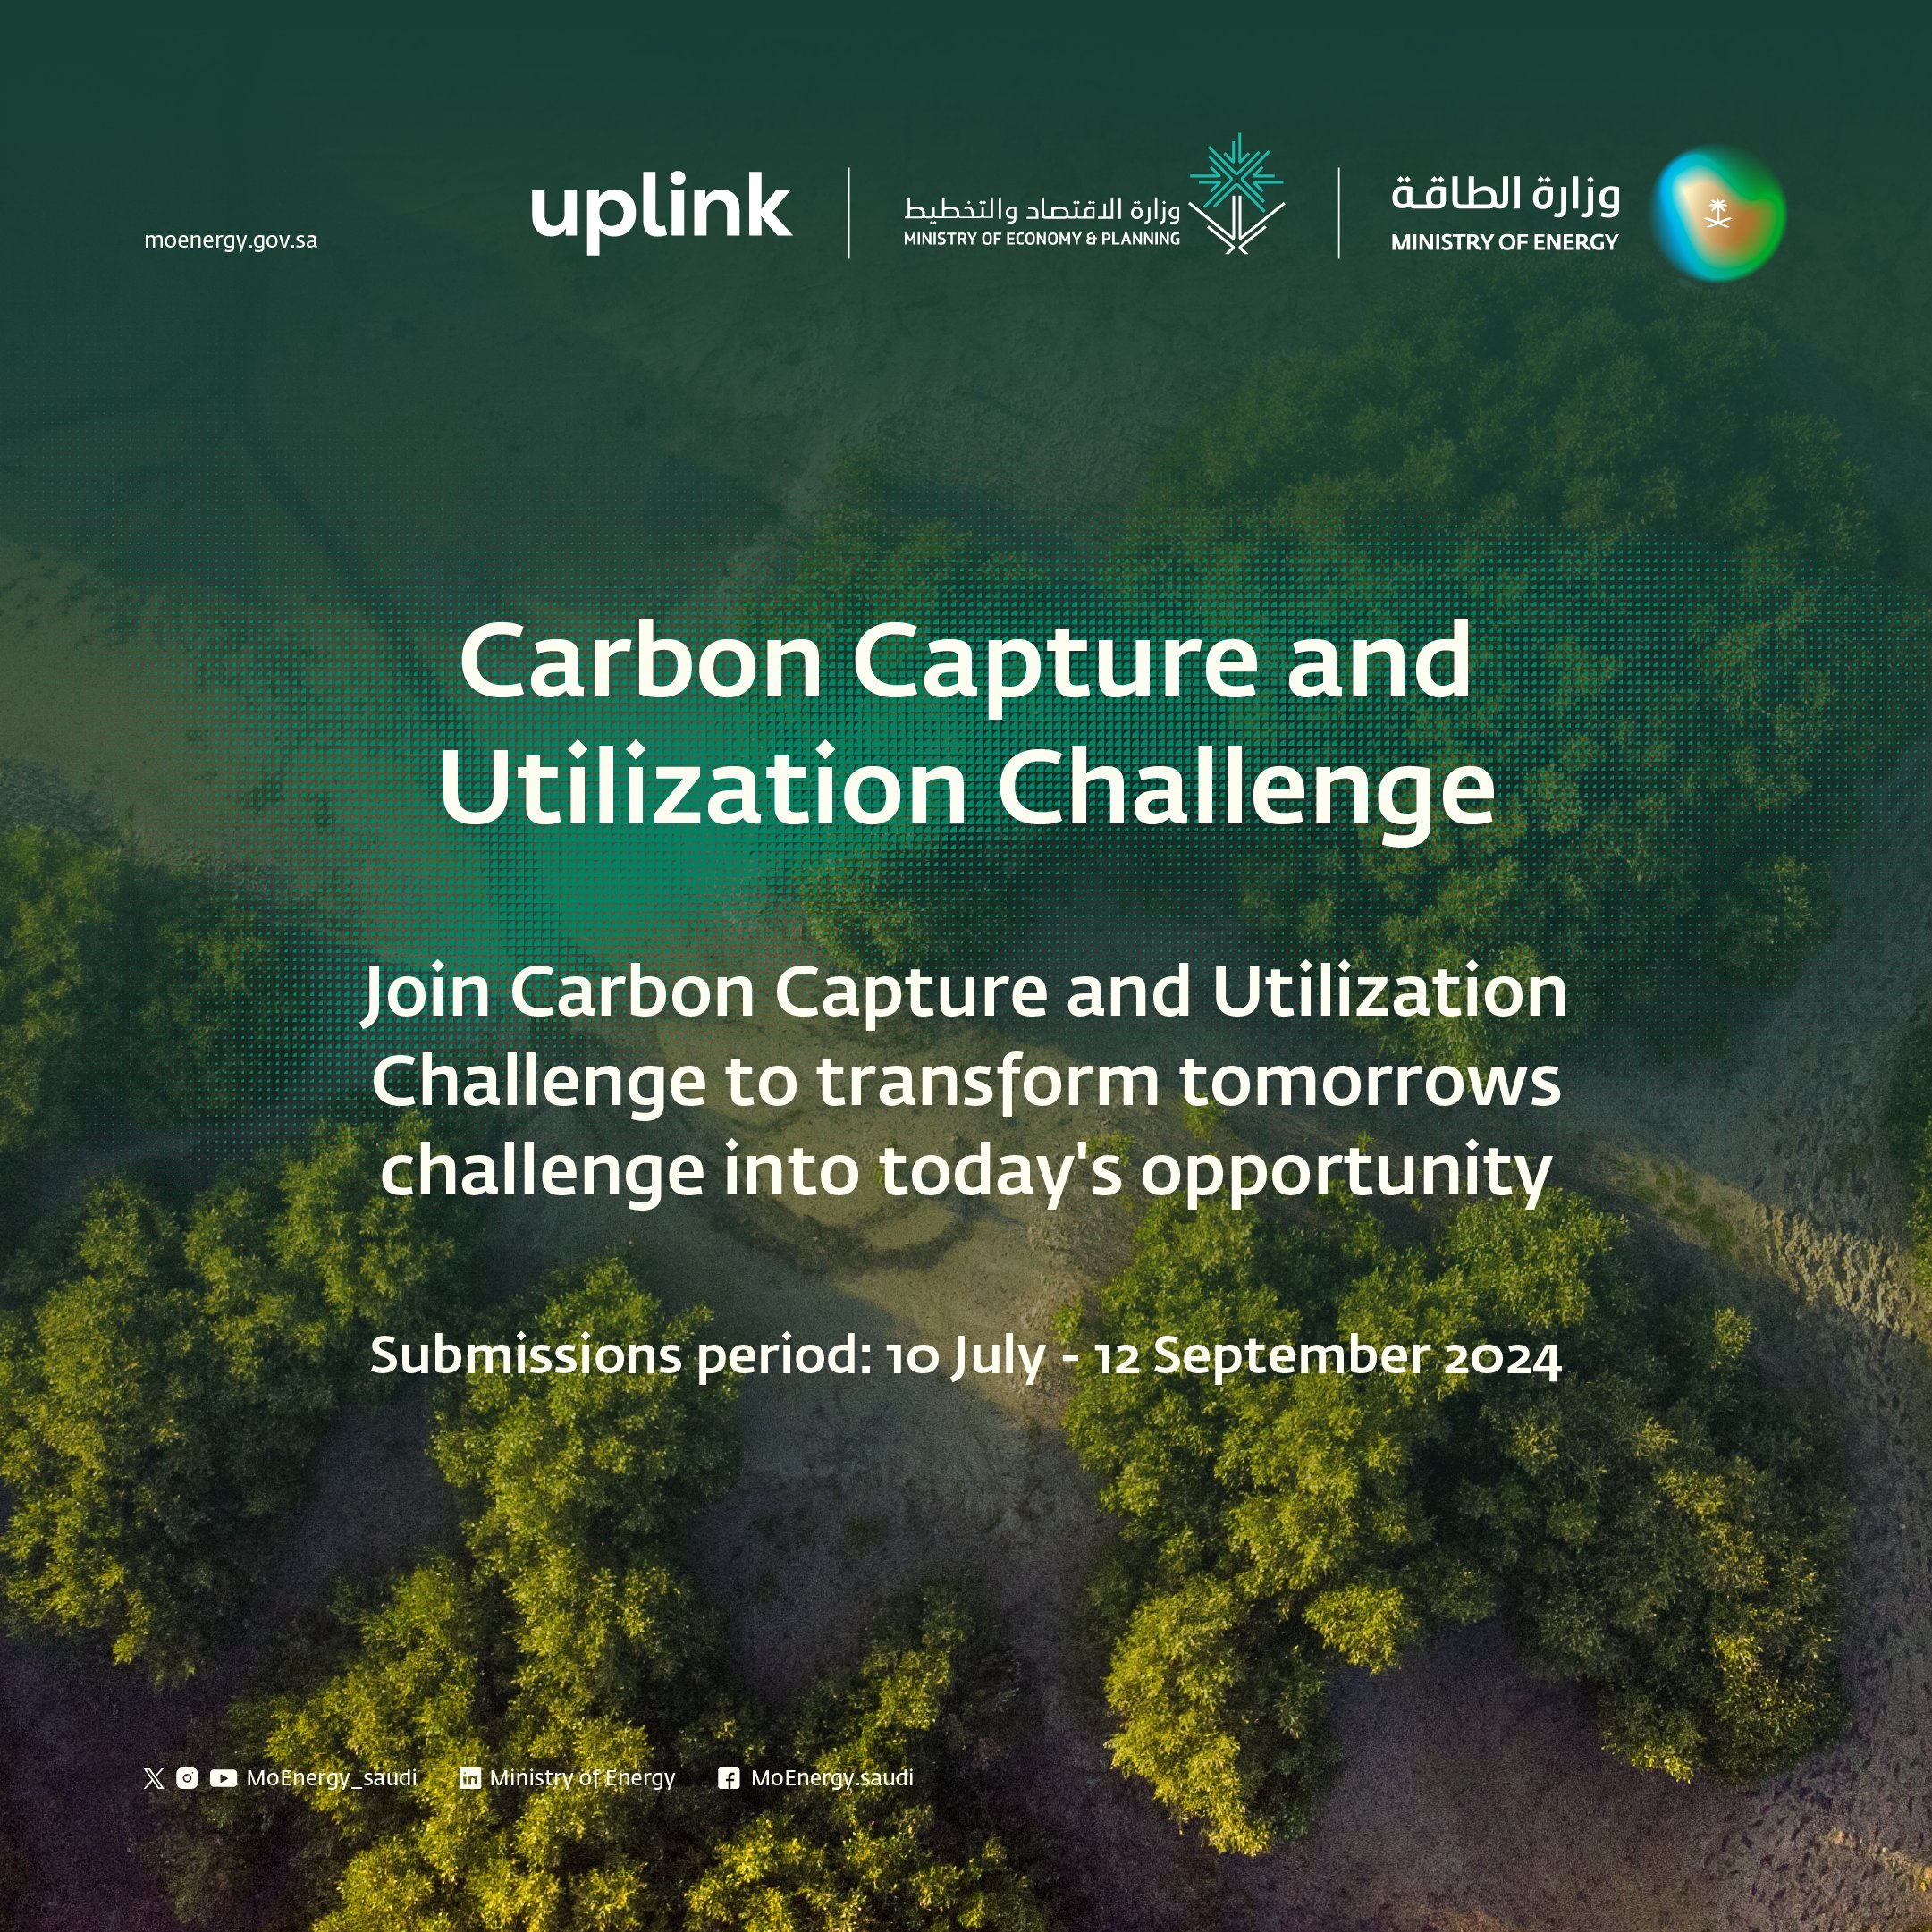 Ministry of Energy and Ministry of Economy Launch Global Carbon Capture Challenge with UpLink